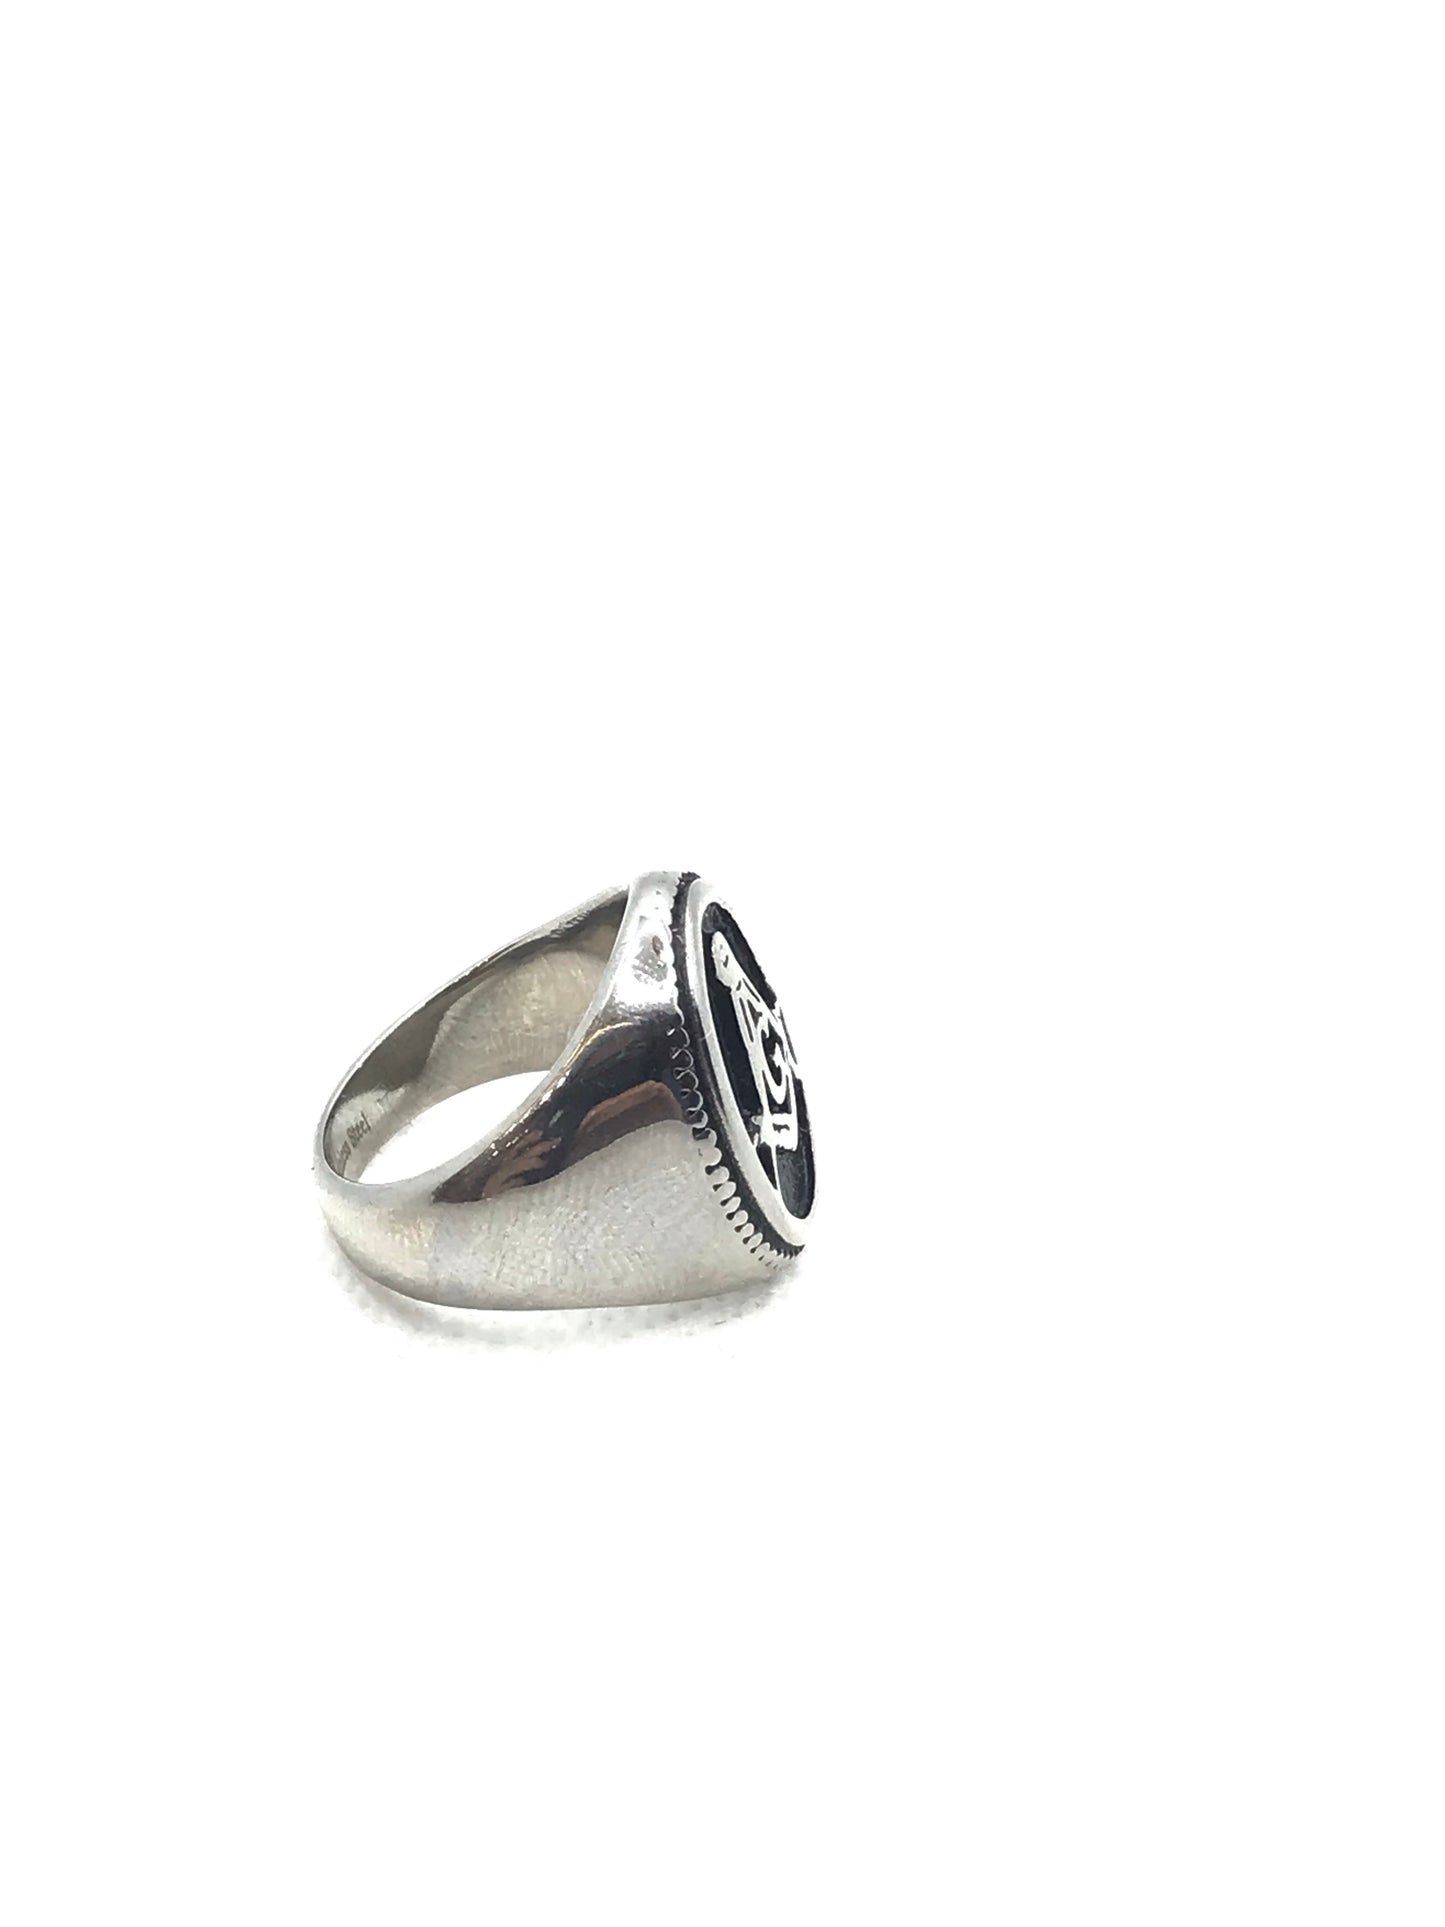 Stainless steel Oval Masonic ring